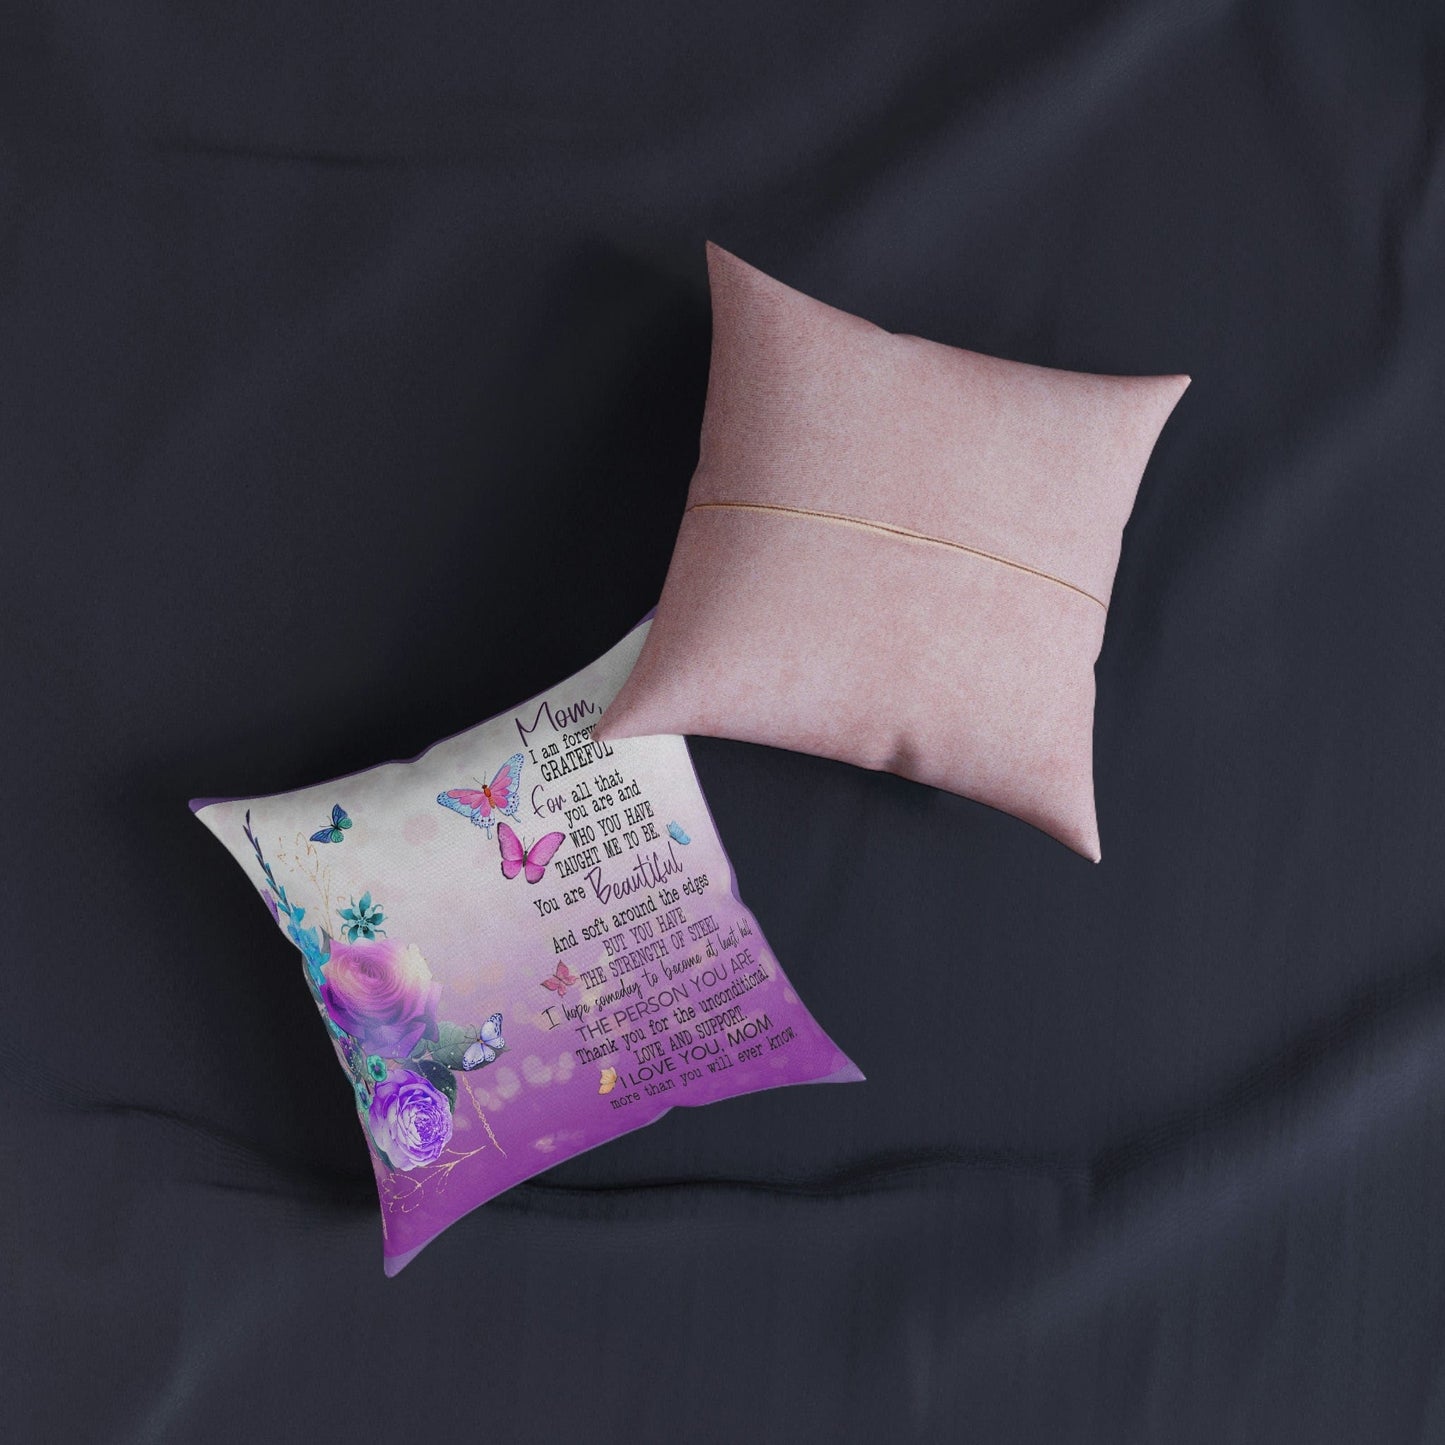 Mom Square Pillow - Pink Back